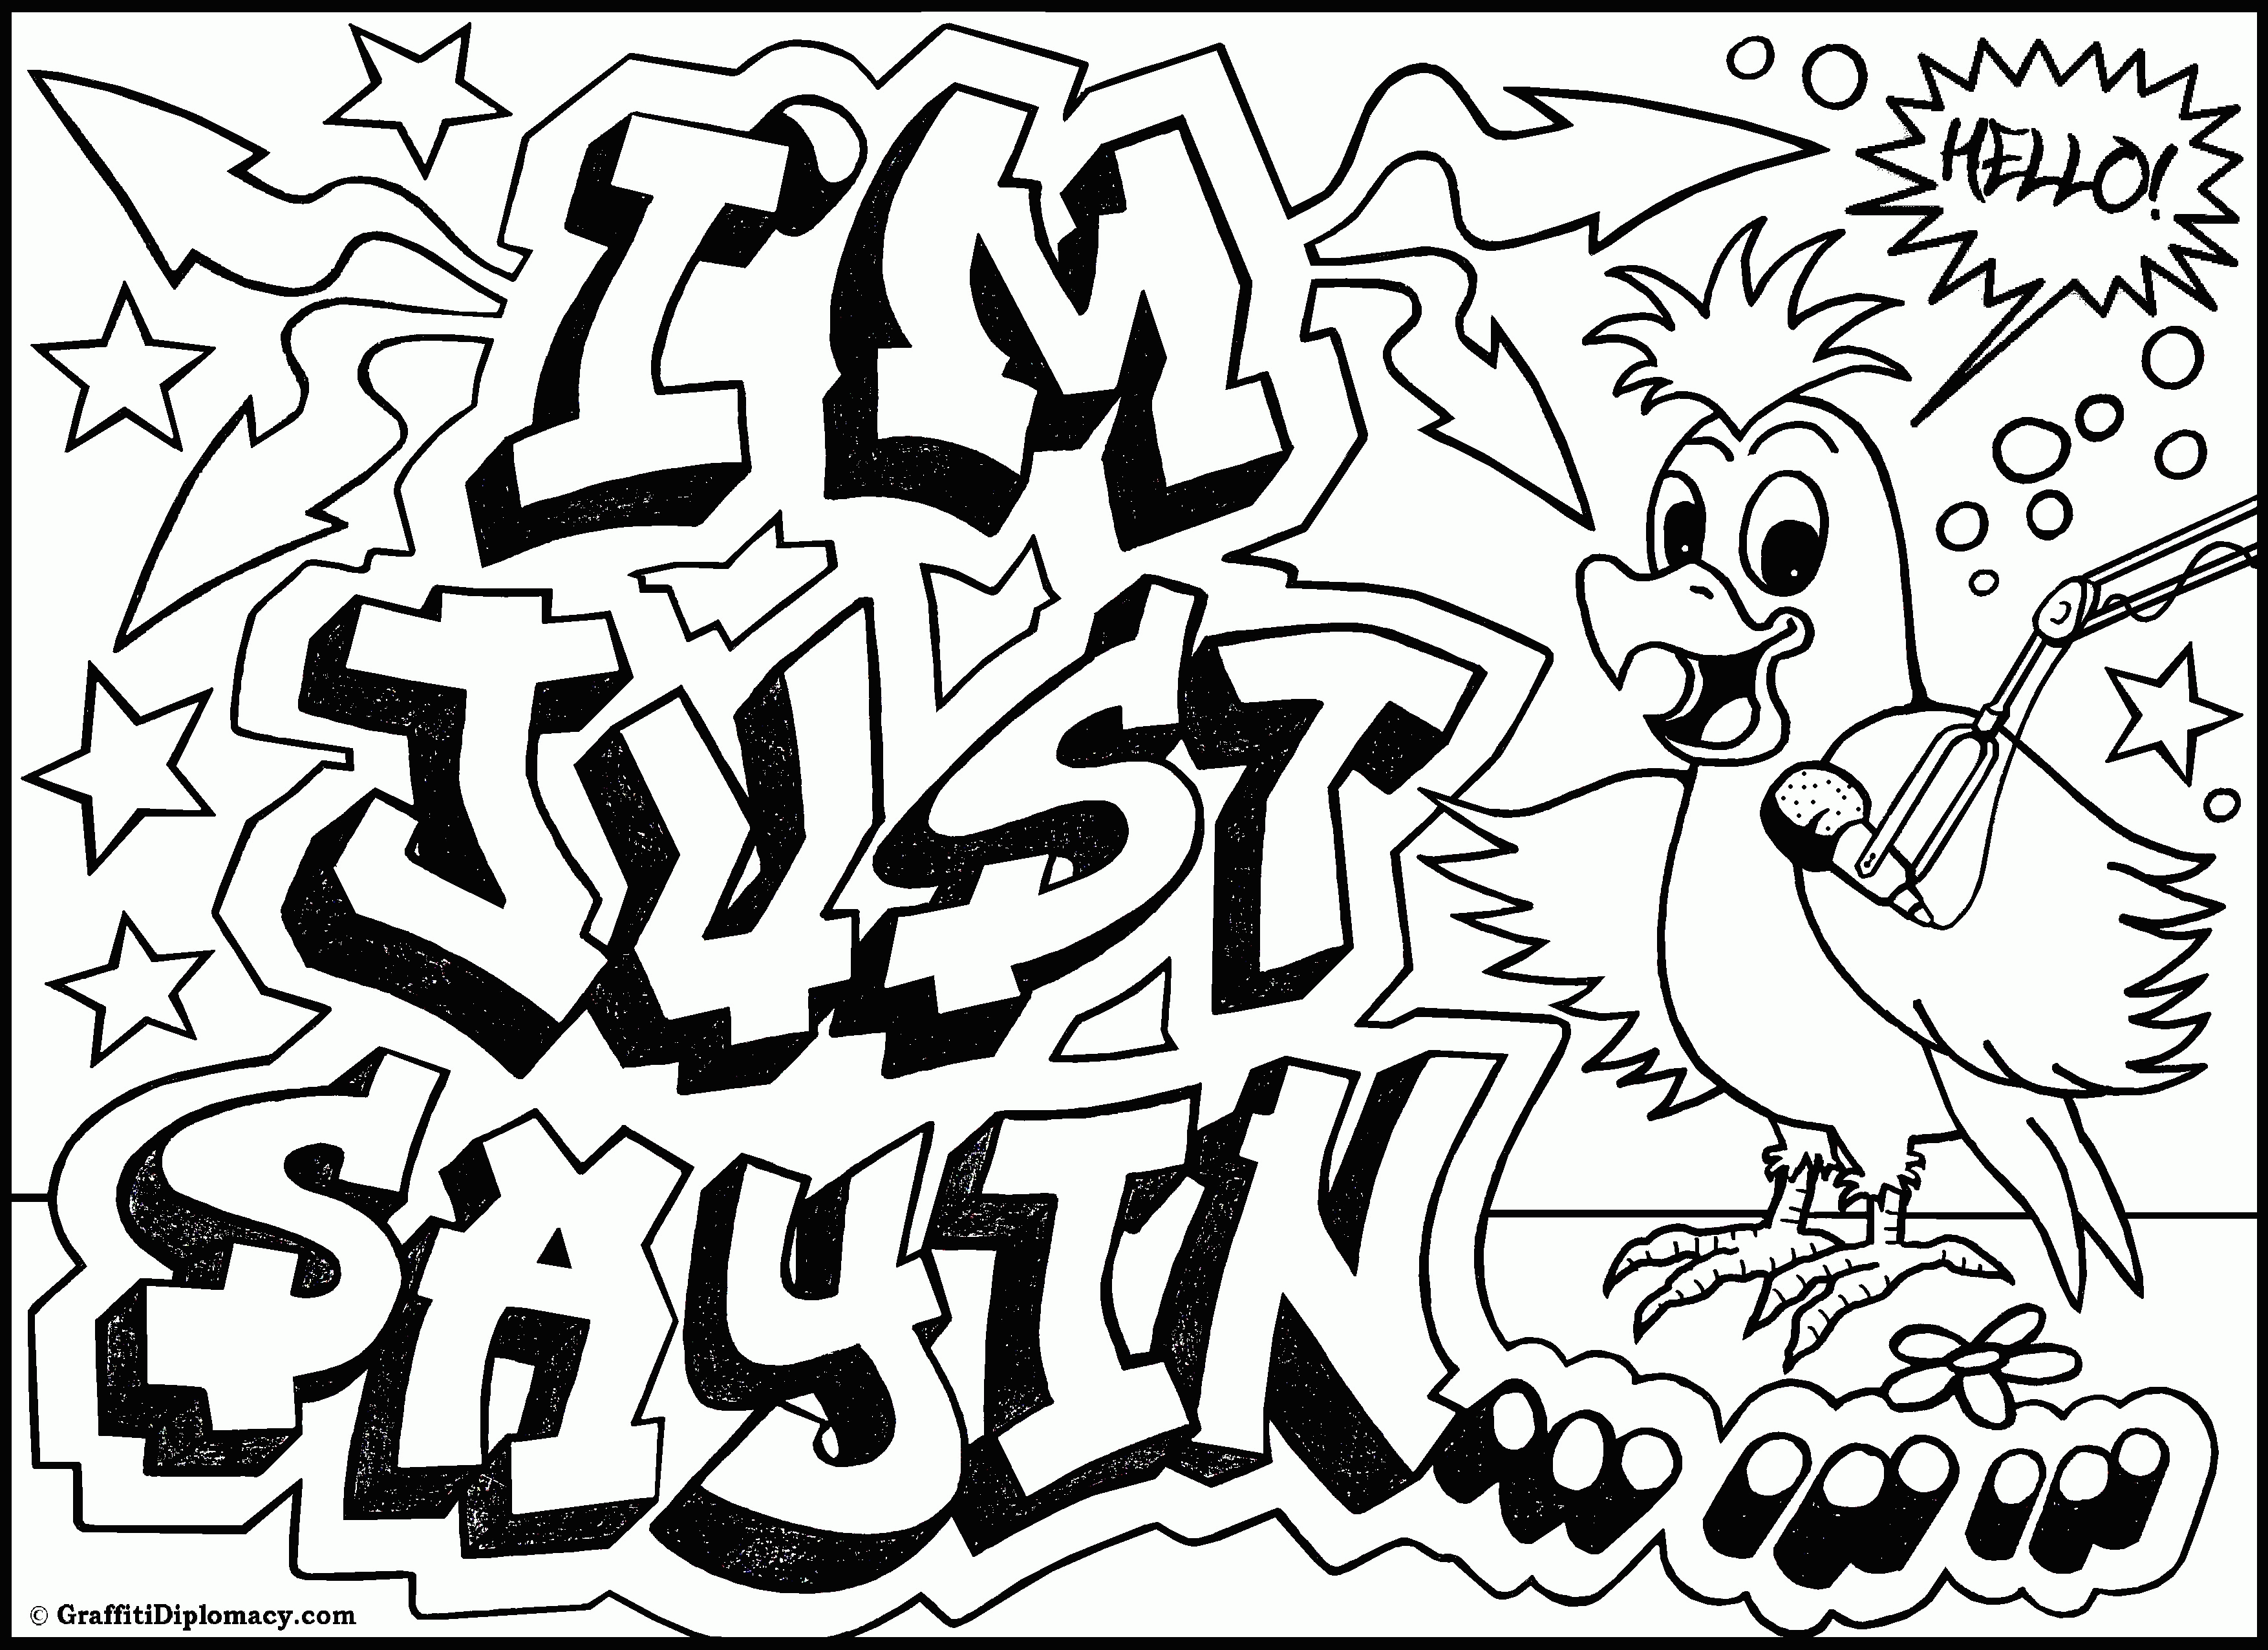 Ingenuity Free Coloring Pages Of Graffiti Spray Cans - Widetheme